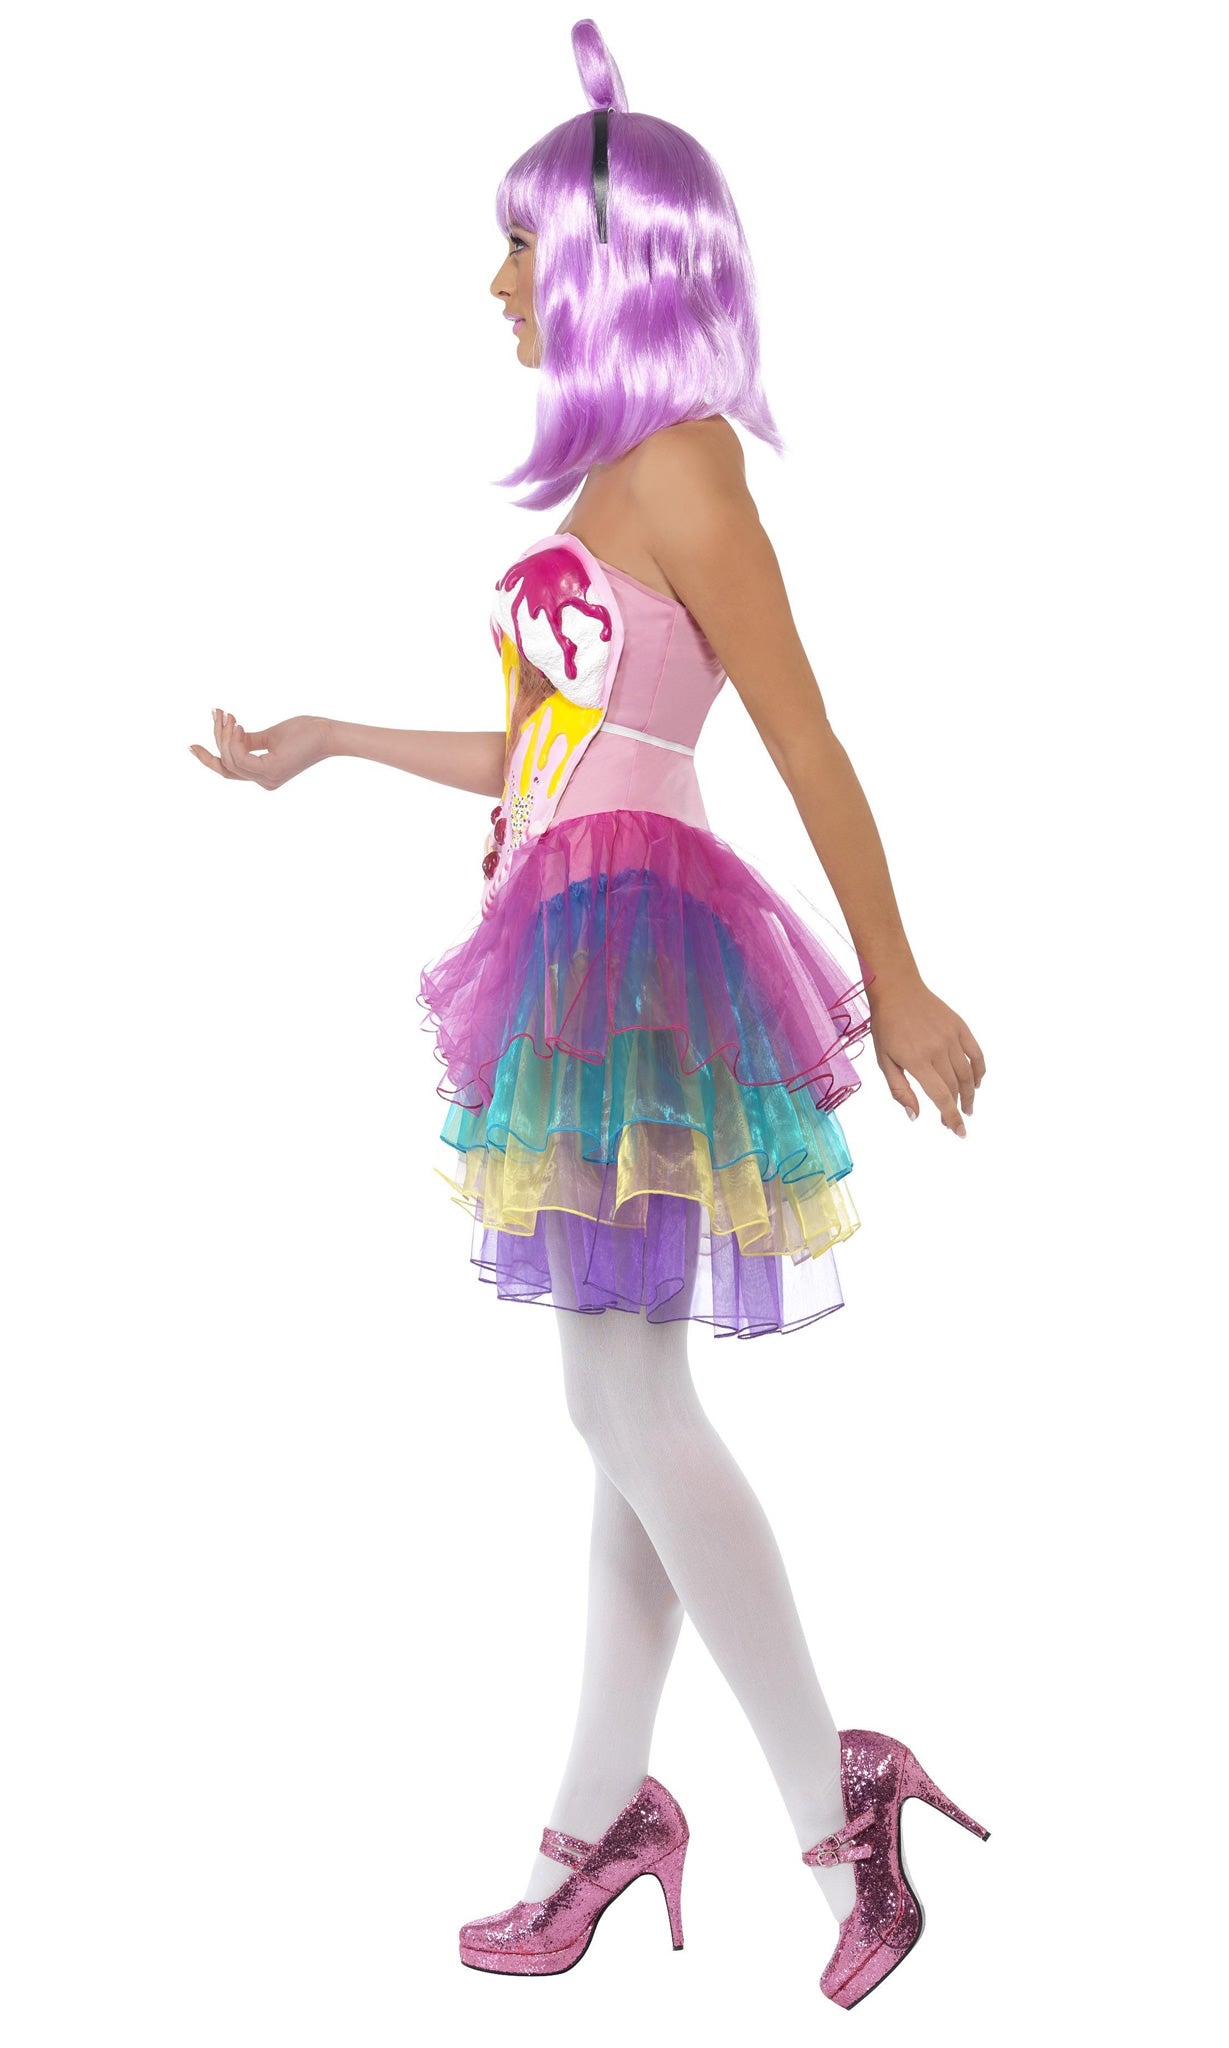 Katy Perry style candy petticoat dress with latex pink bodice on front